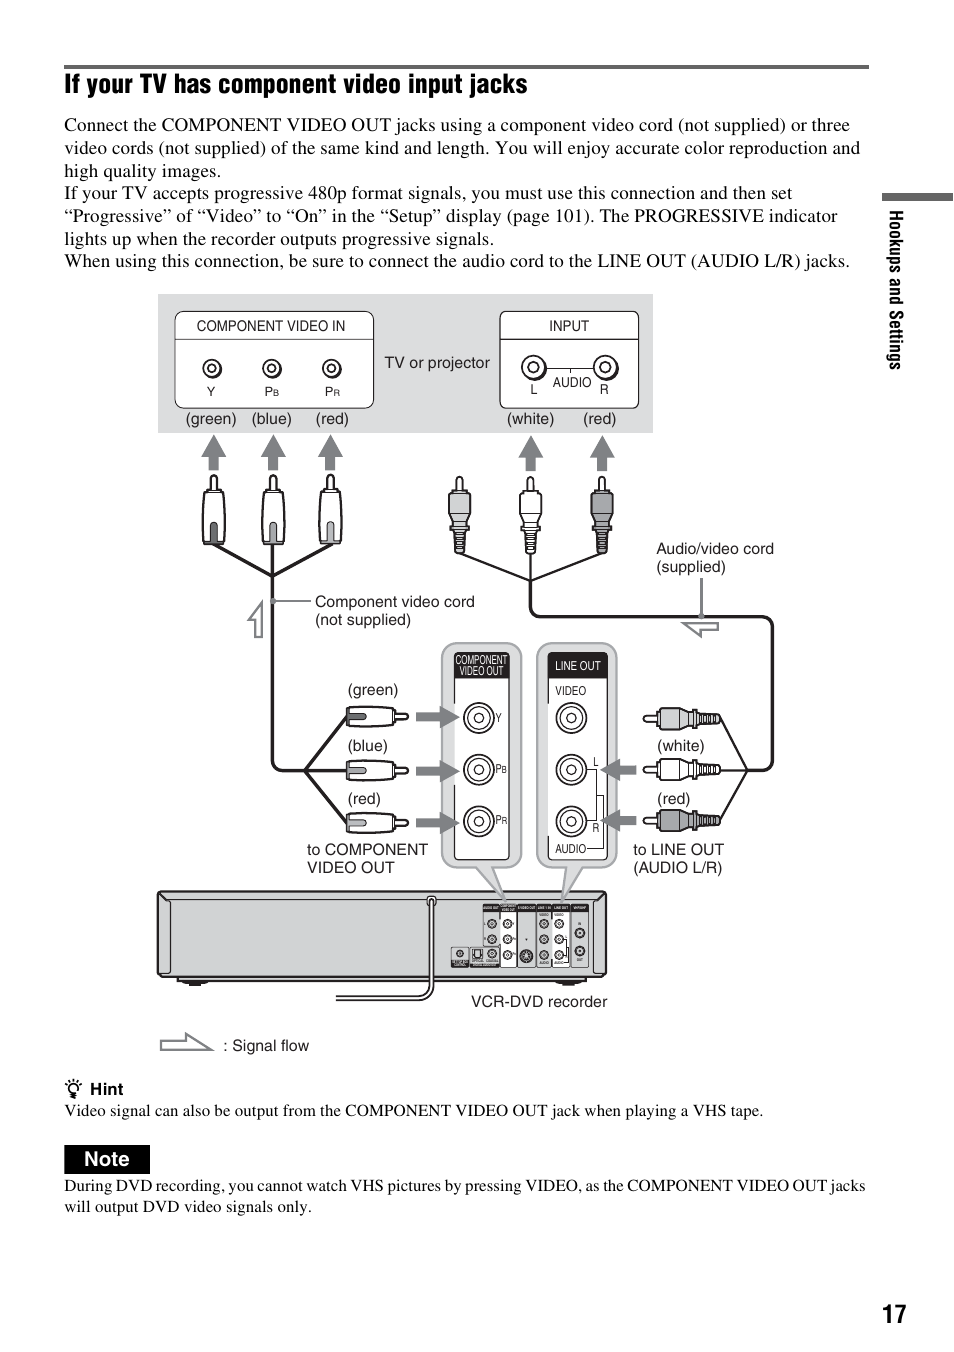 If your tv has component video input jacks, Hook ups and se tti n gs | Sony RDR-VX521 User Manual | Page 17 / 132